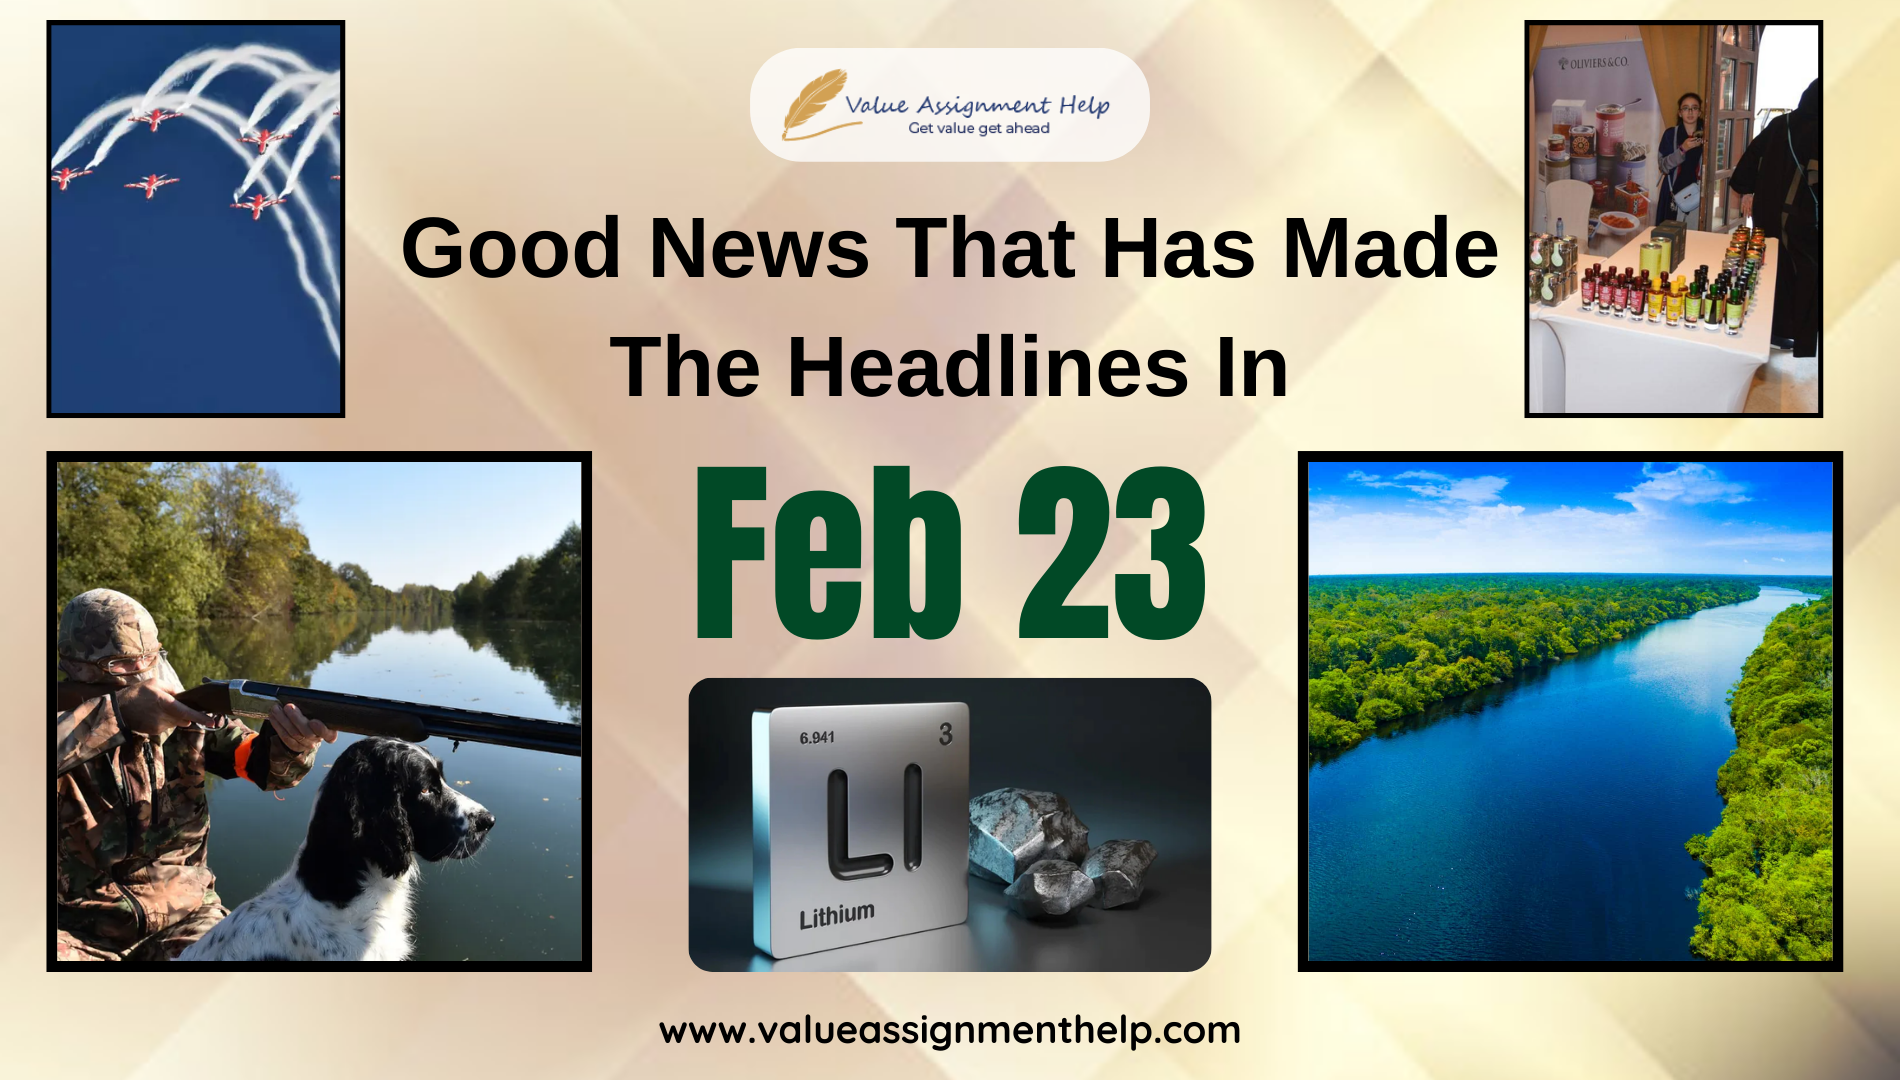 Good News that has made the headlines in Feb23